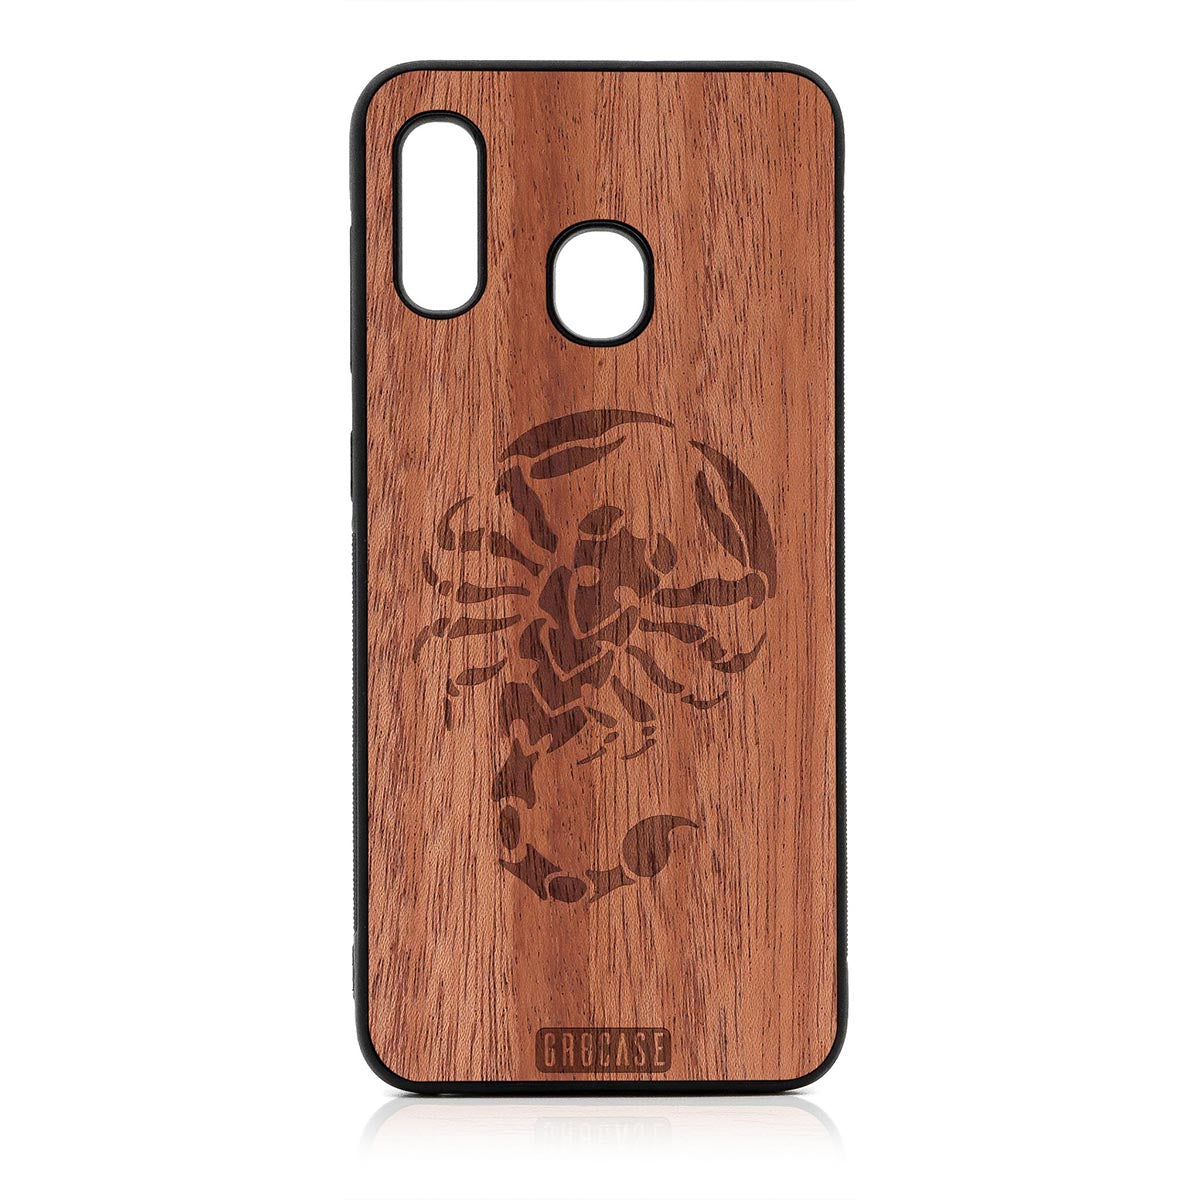 Scorpion Design Wood Case For Samsung Galaxy A20 by GR8CASE